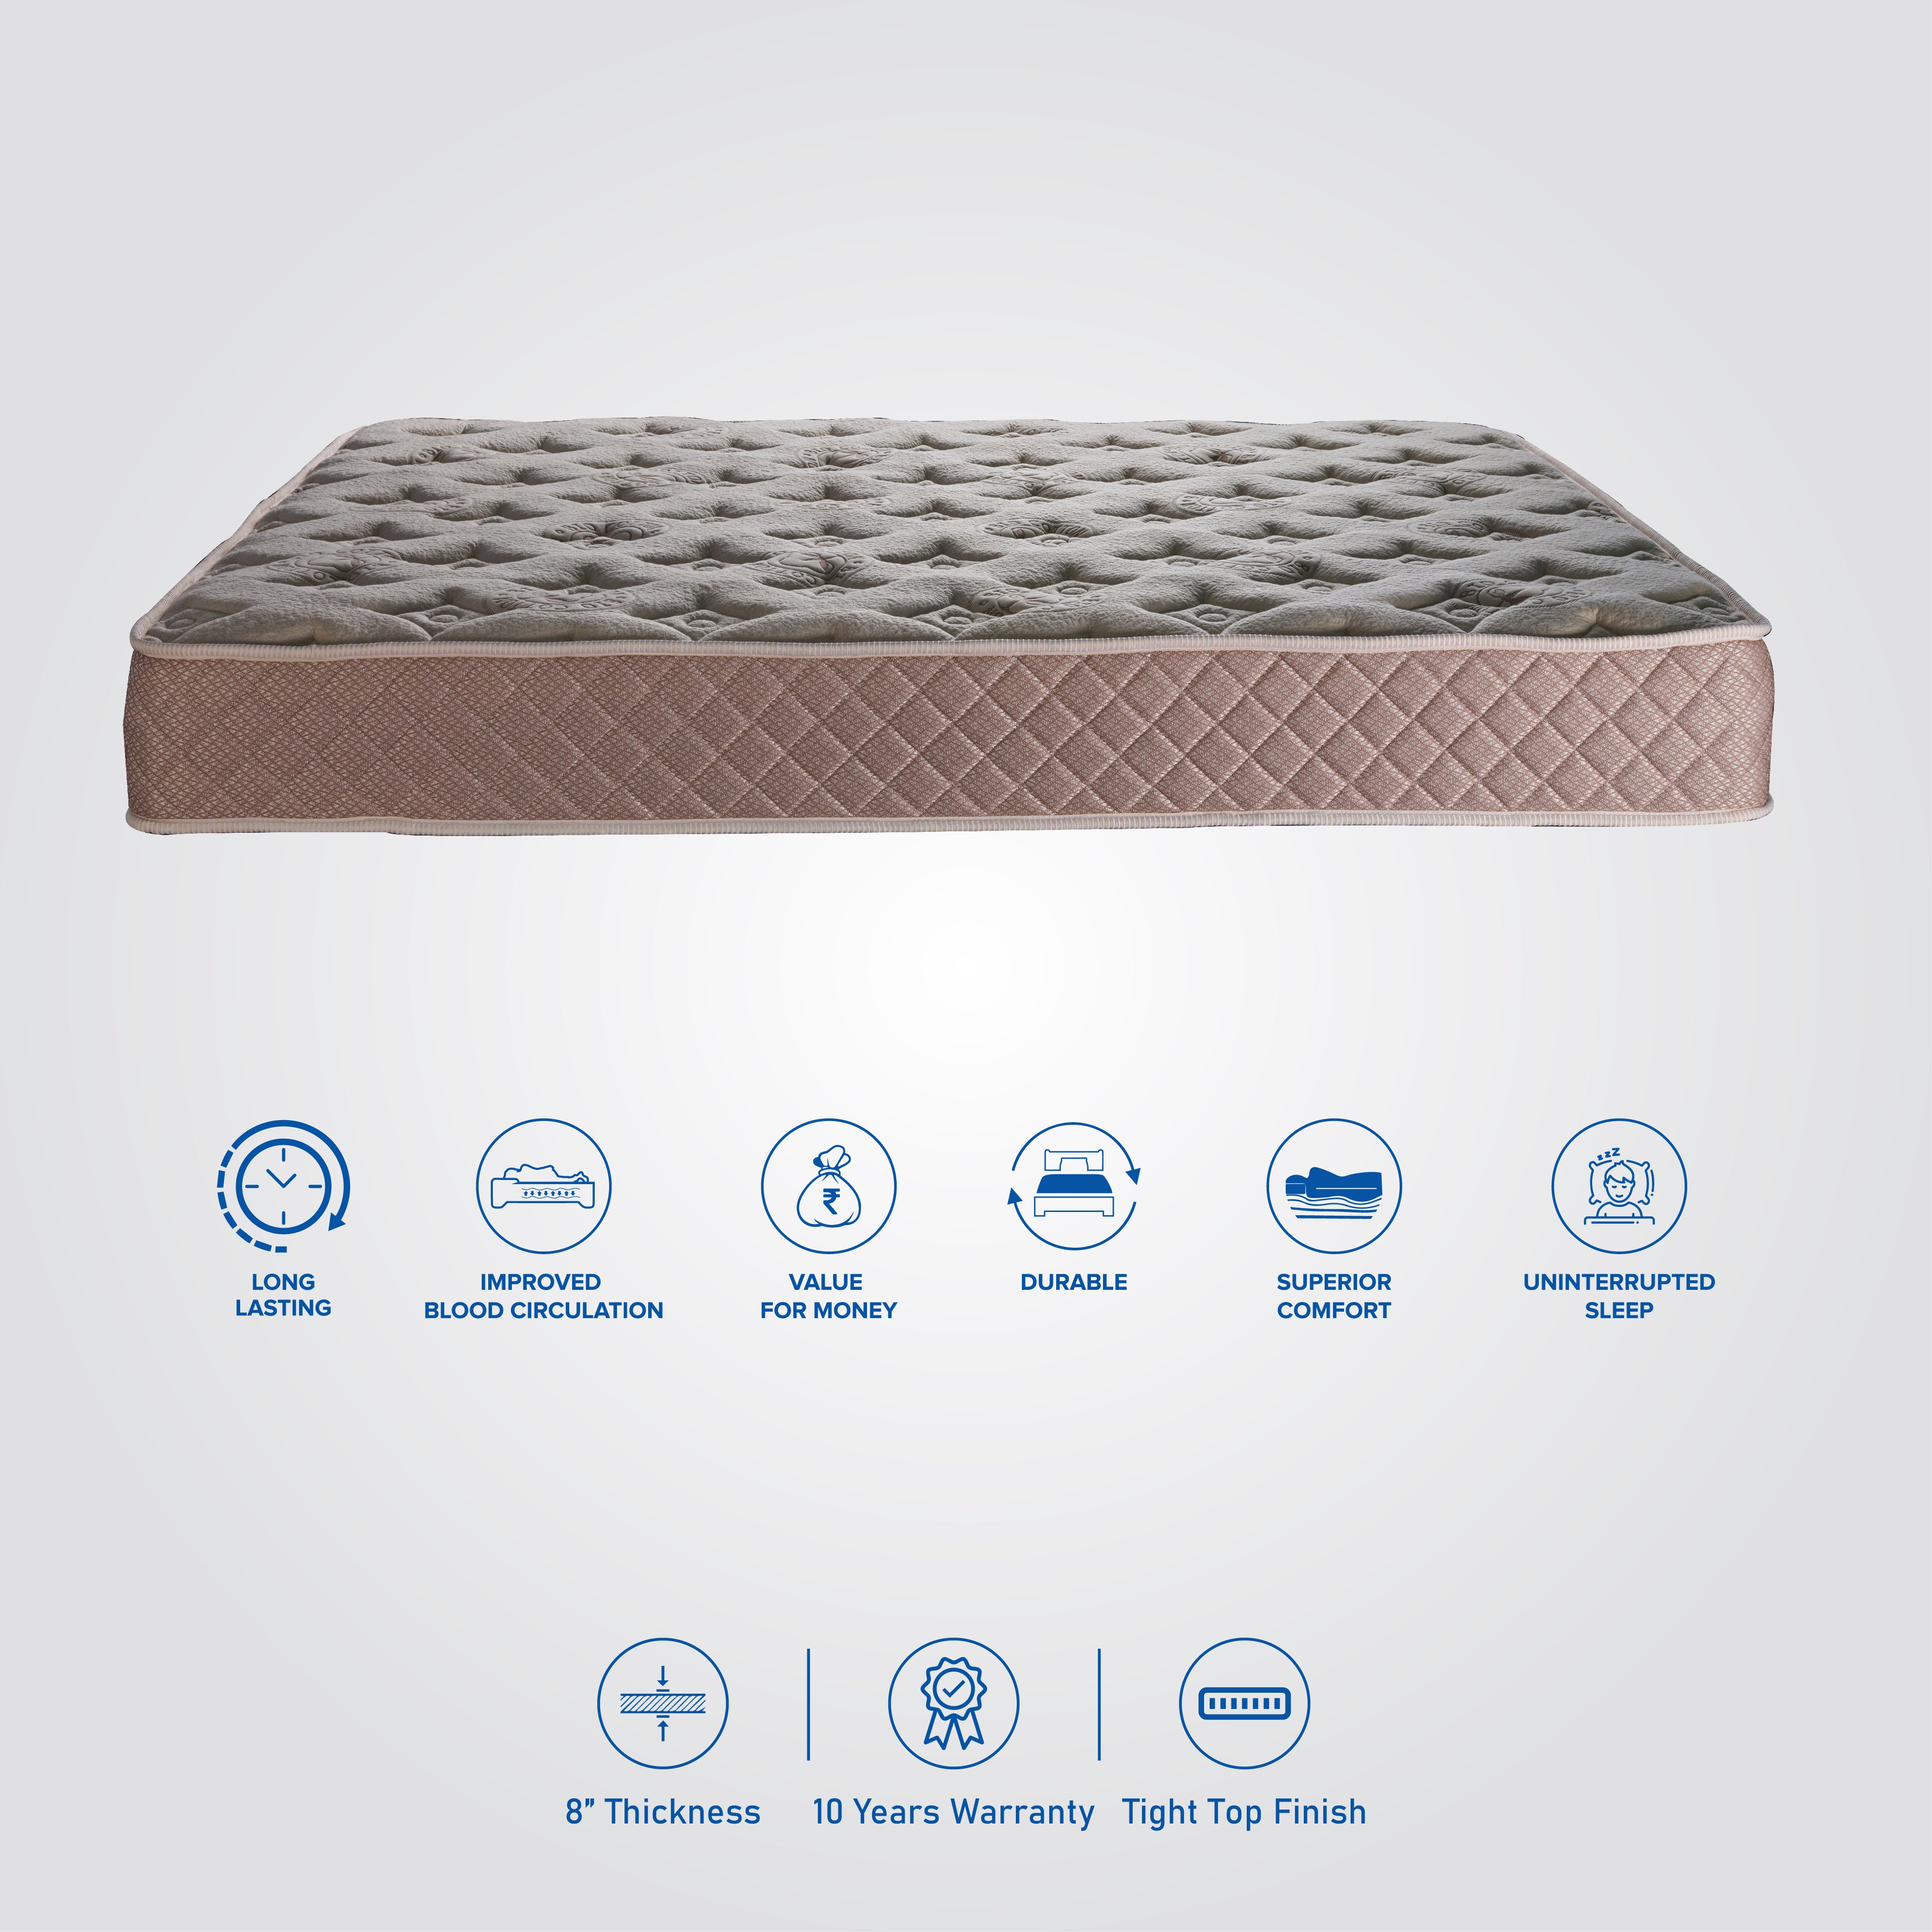 Memory Foam And Rubberised Coir Mattress In India